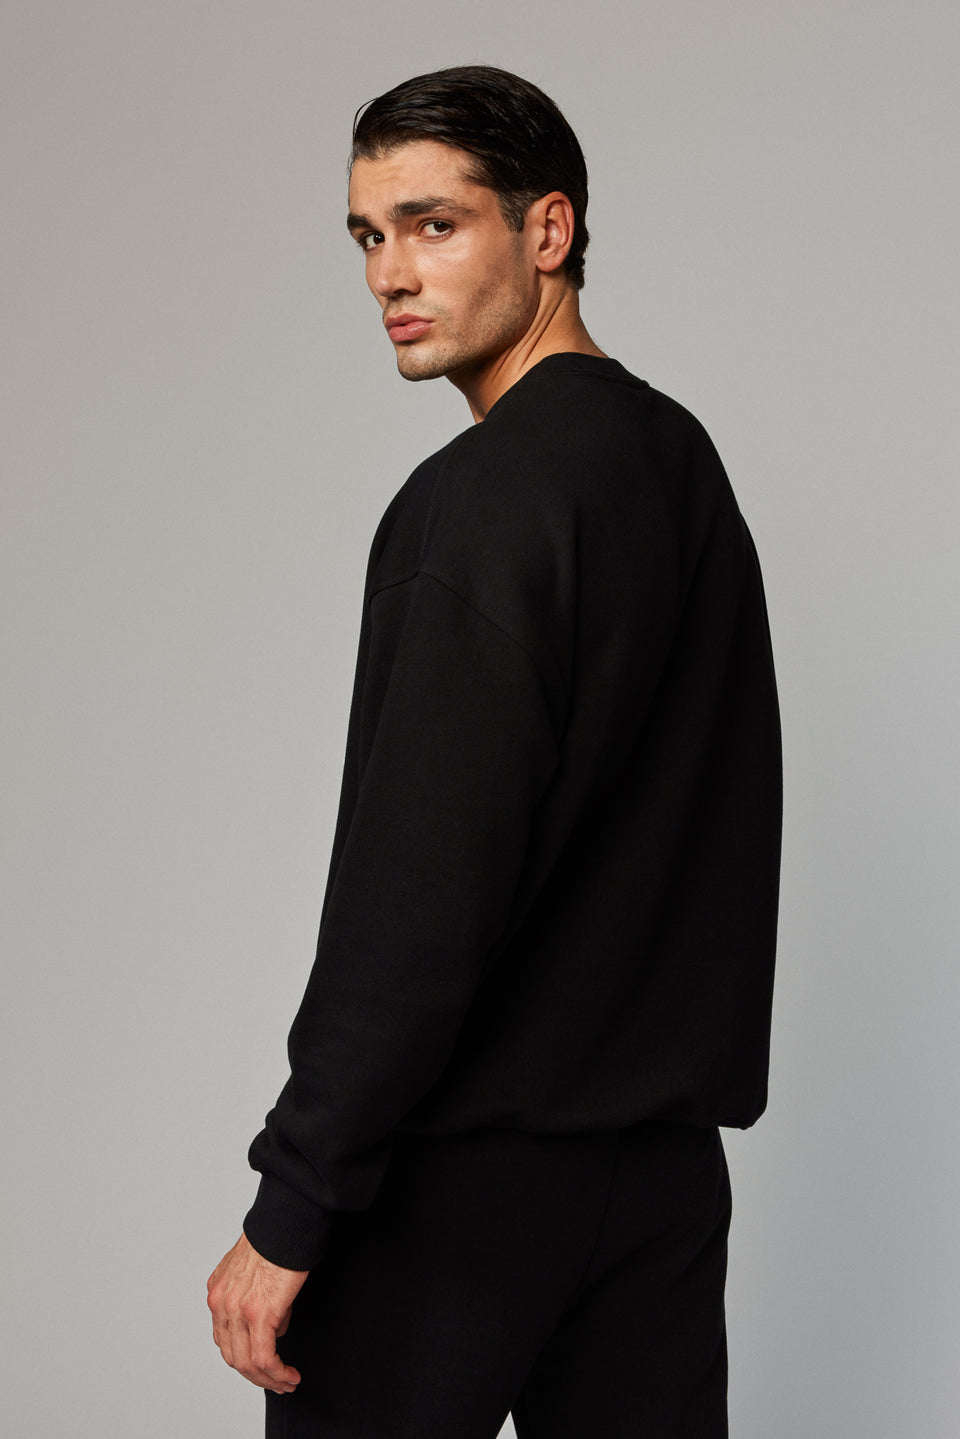 Illyrian Classical Sweater - Black